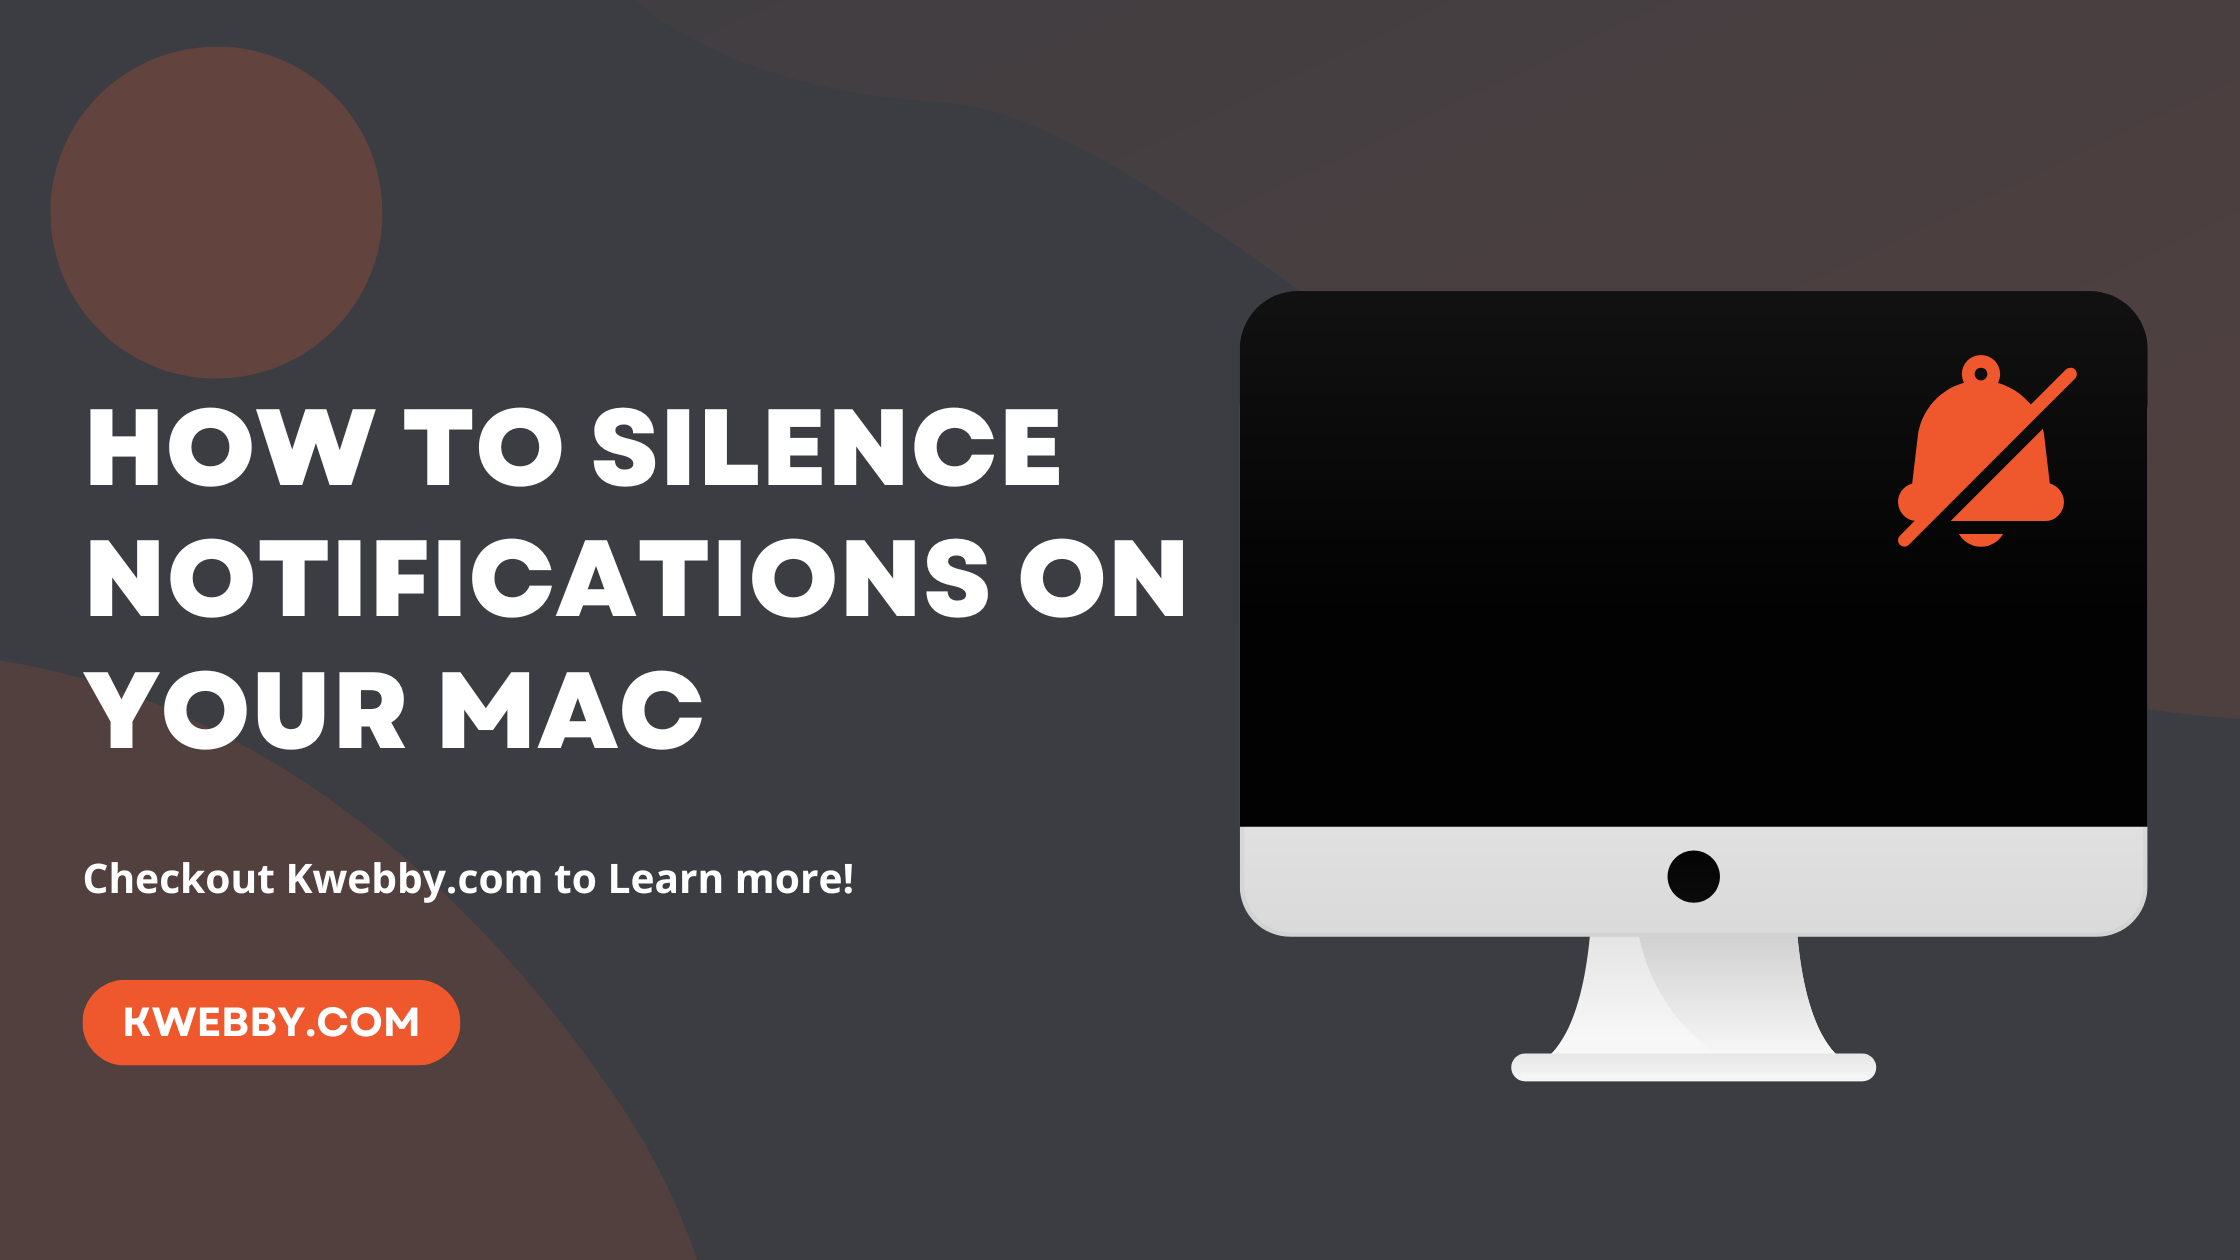 How to Silence Notifications on your Mac